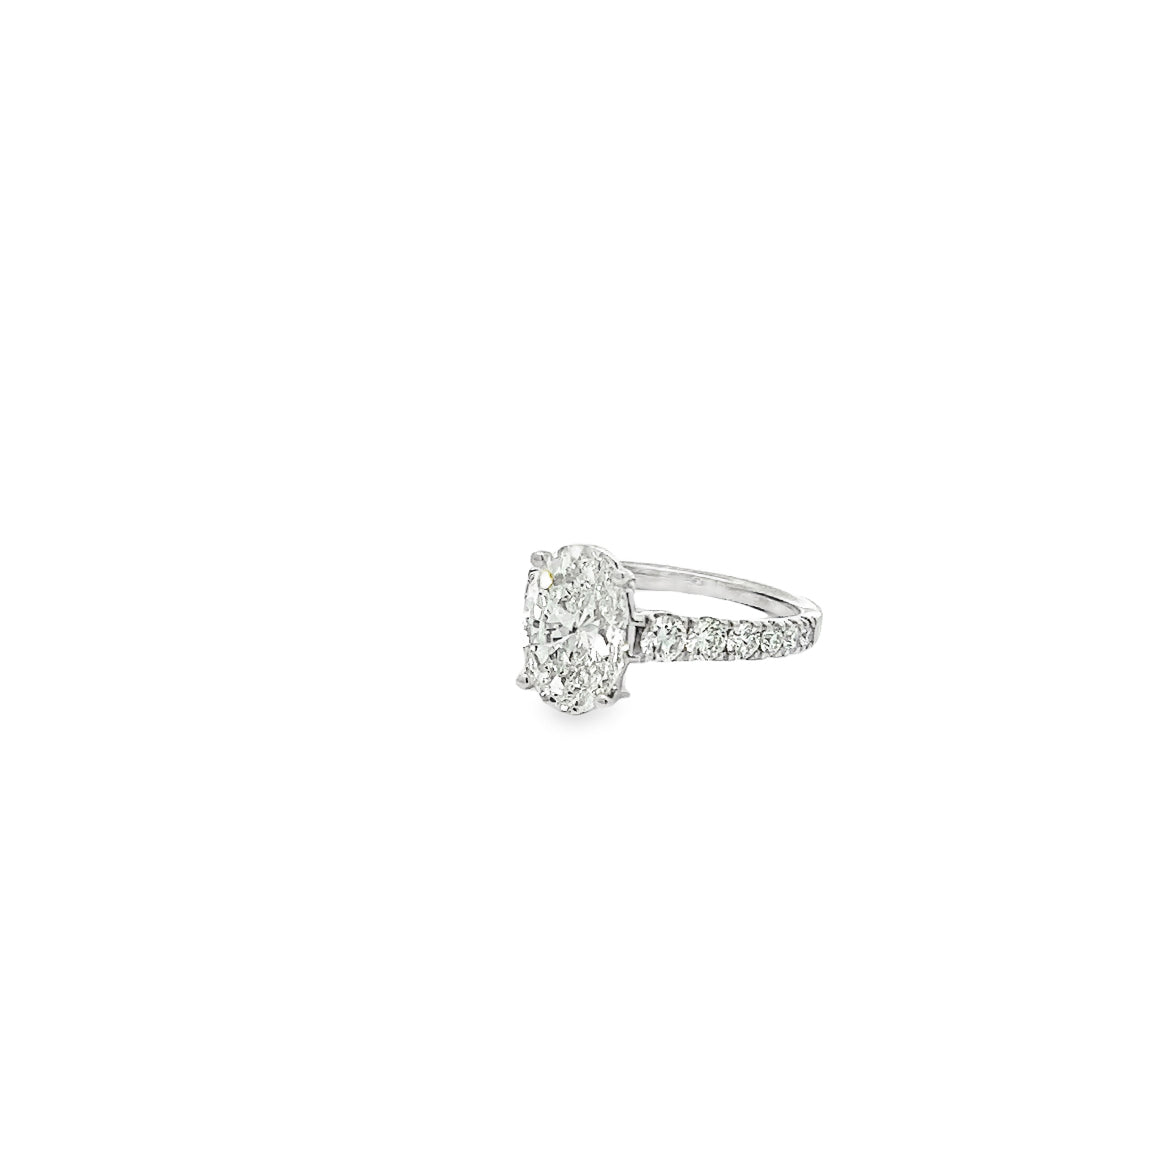 The Grand 18k White Gold Round Engagement Ring